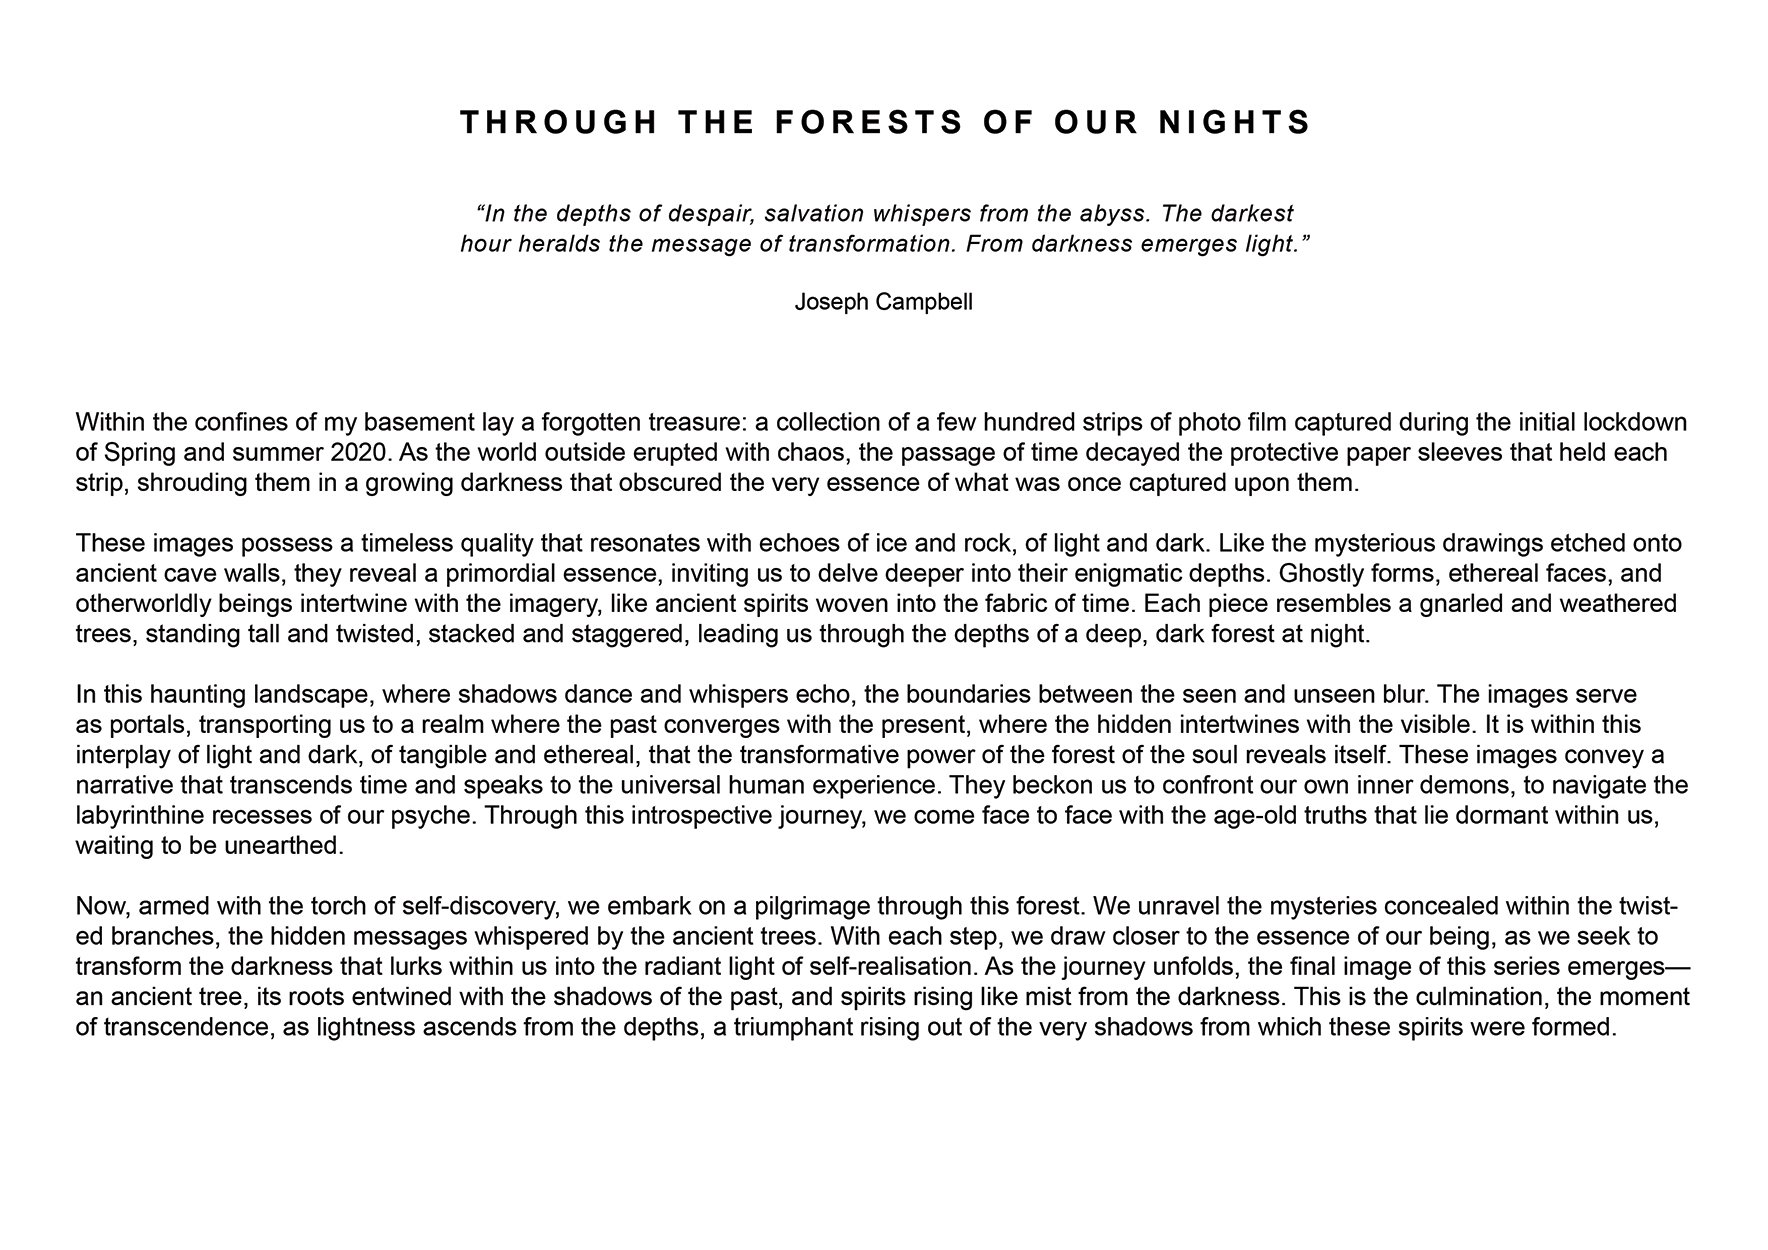 THROUGH-THE-FORESTS-OF-THE-NIGHTS-intro.jpg